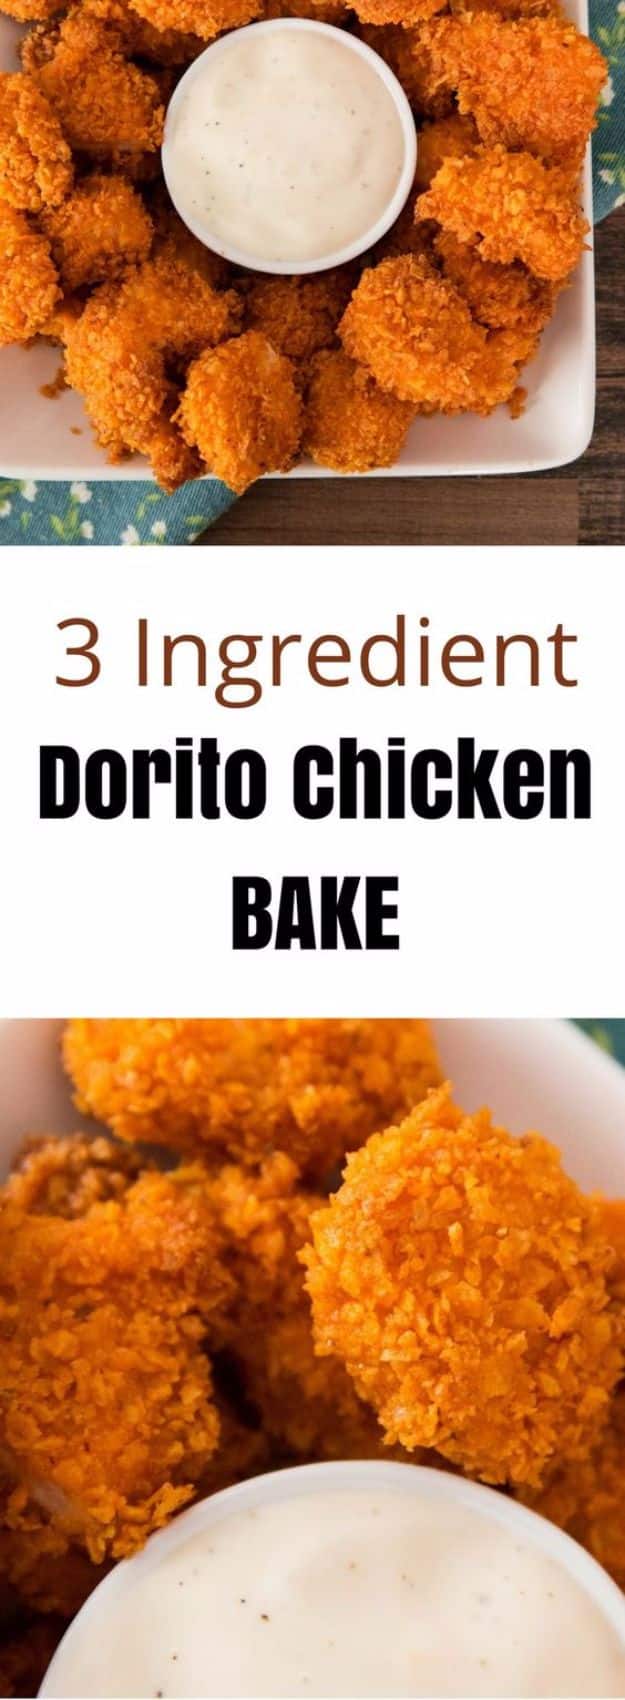 DIY Recipes Made With Doritos - 3-Ingredient Chicken Dorito Bake - Best Dorito Recipes for Casserole, Taco Salad, Chicken Dinners, Beef Casseroles, Nachos, Easy Cool Ranch Meals and Ideas for Dips, Snacks and Kids Recipe Tutorials - Quick Lunch Ideas and Recipes for Parties 